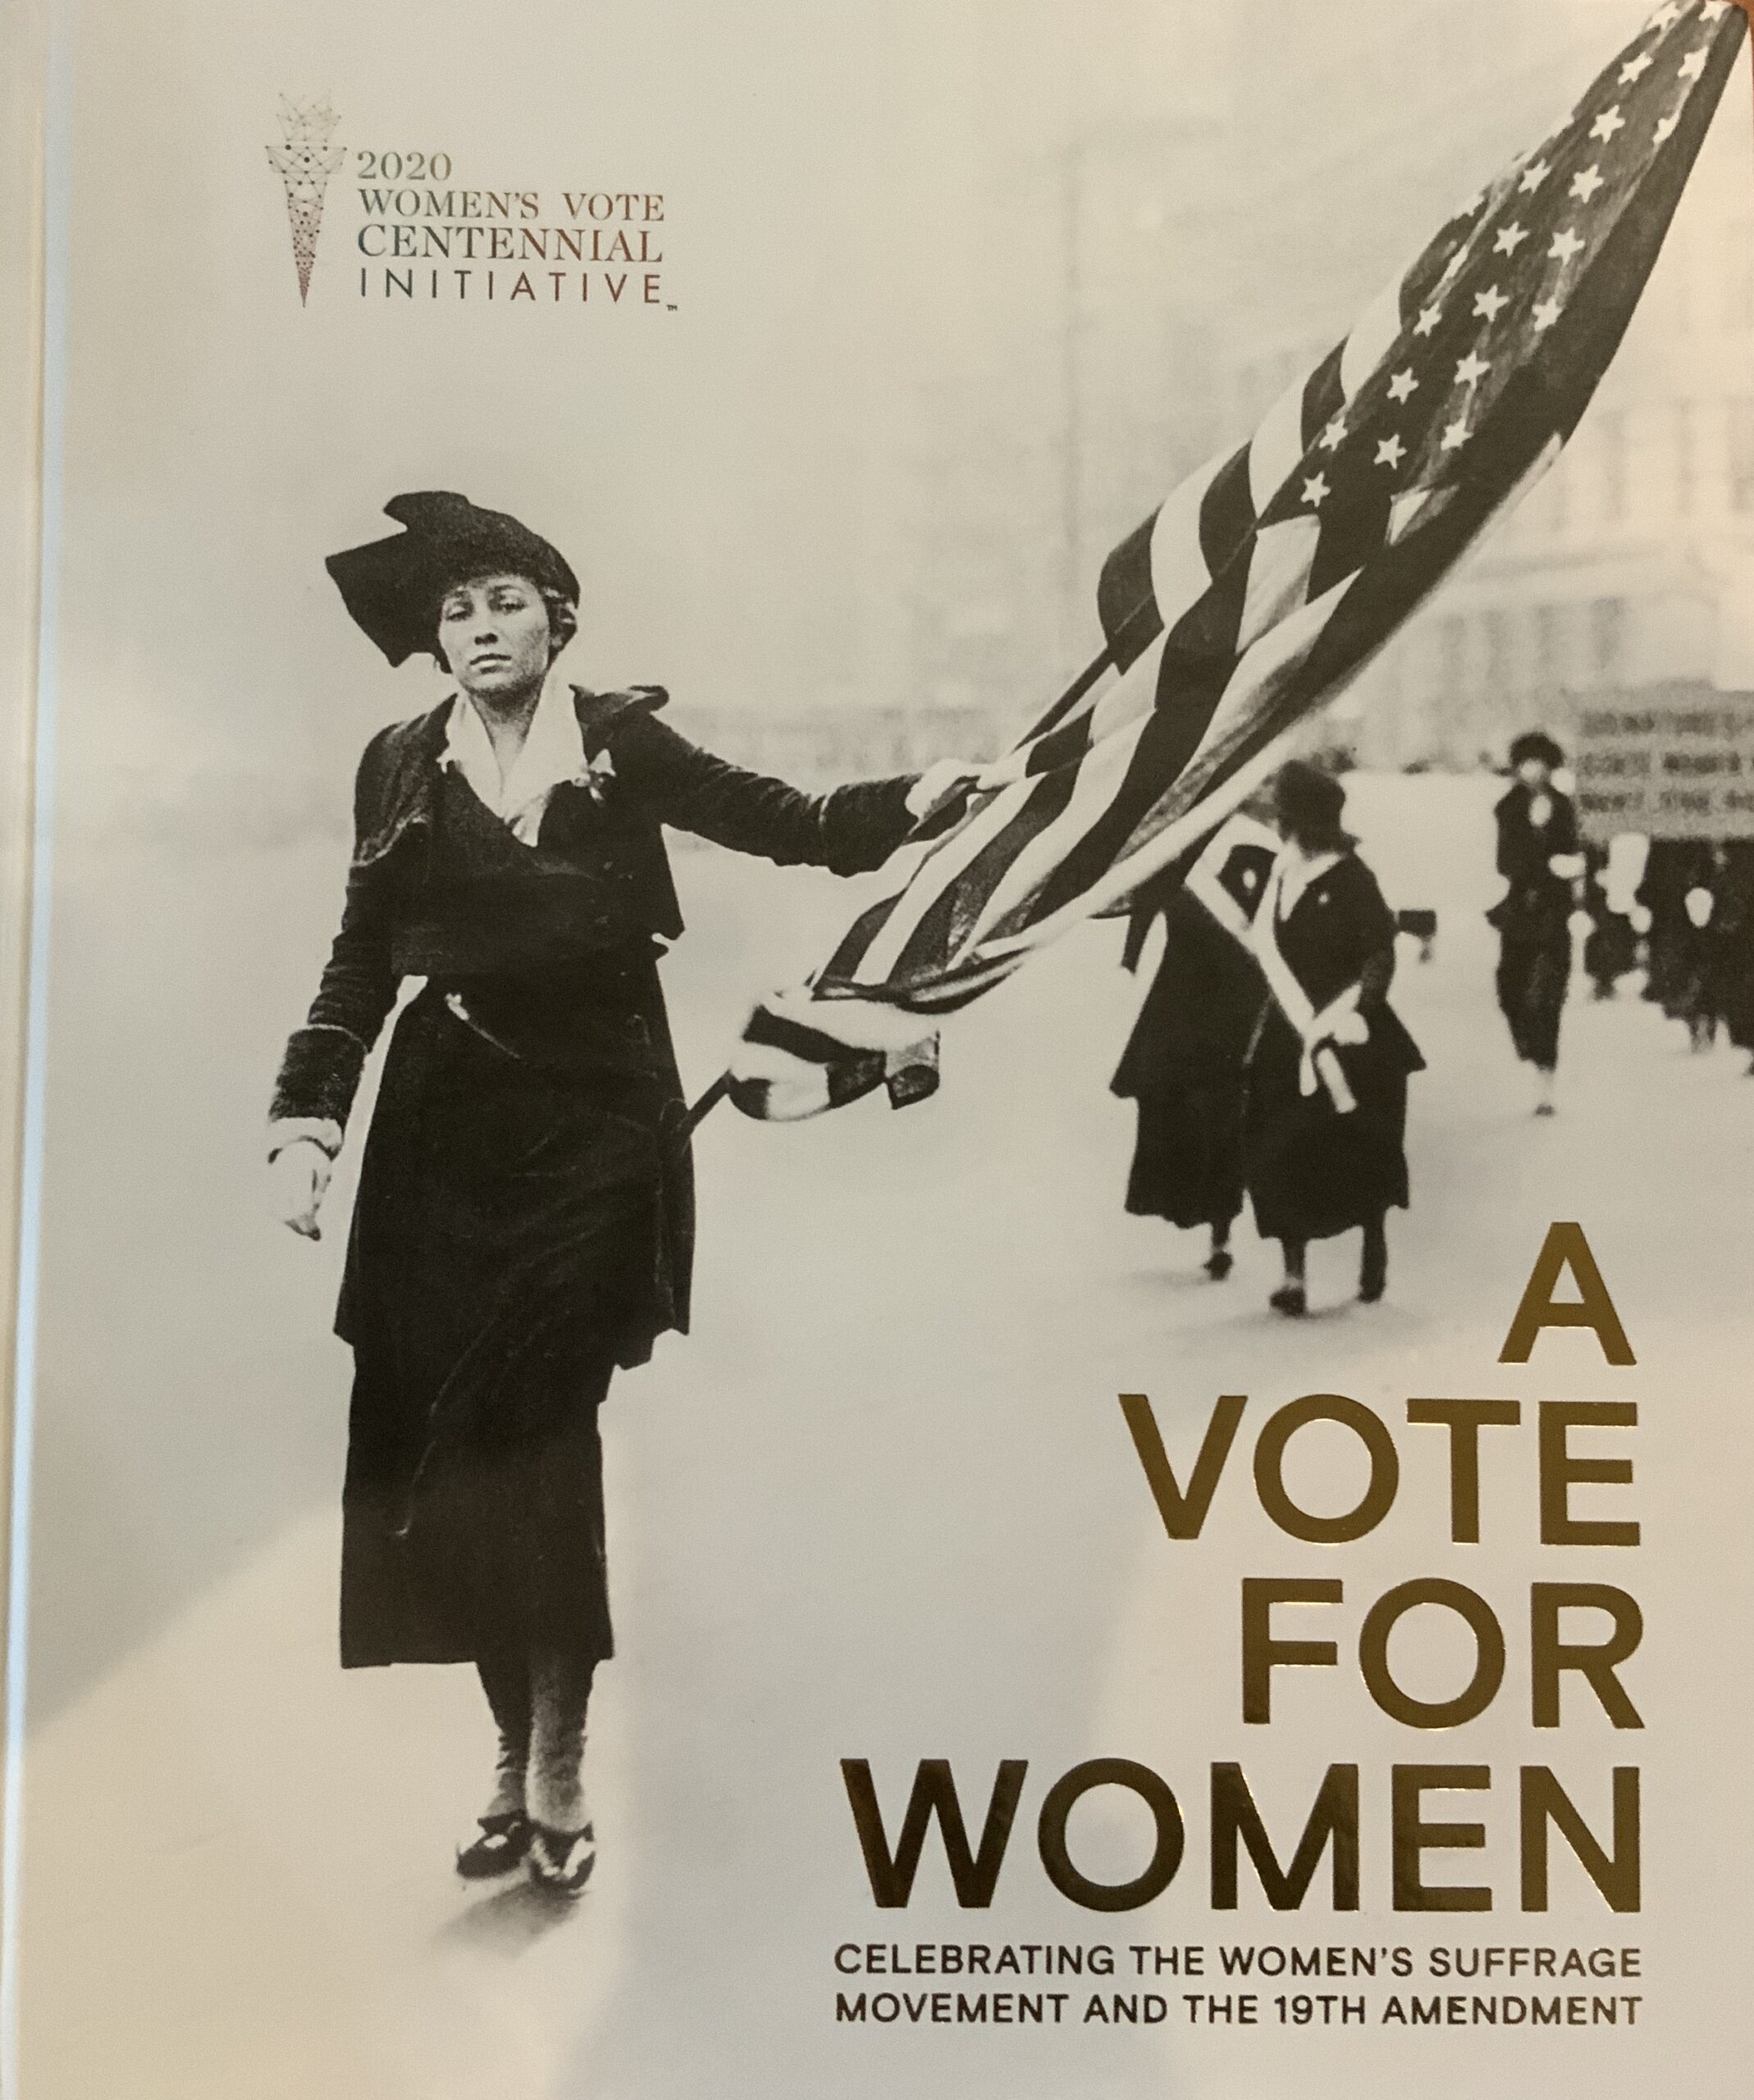 A Vote for Women: Celebrating the Women's Suffrage Movement and the 19th Amendment – Mahwah Museum